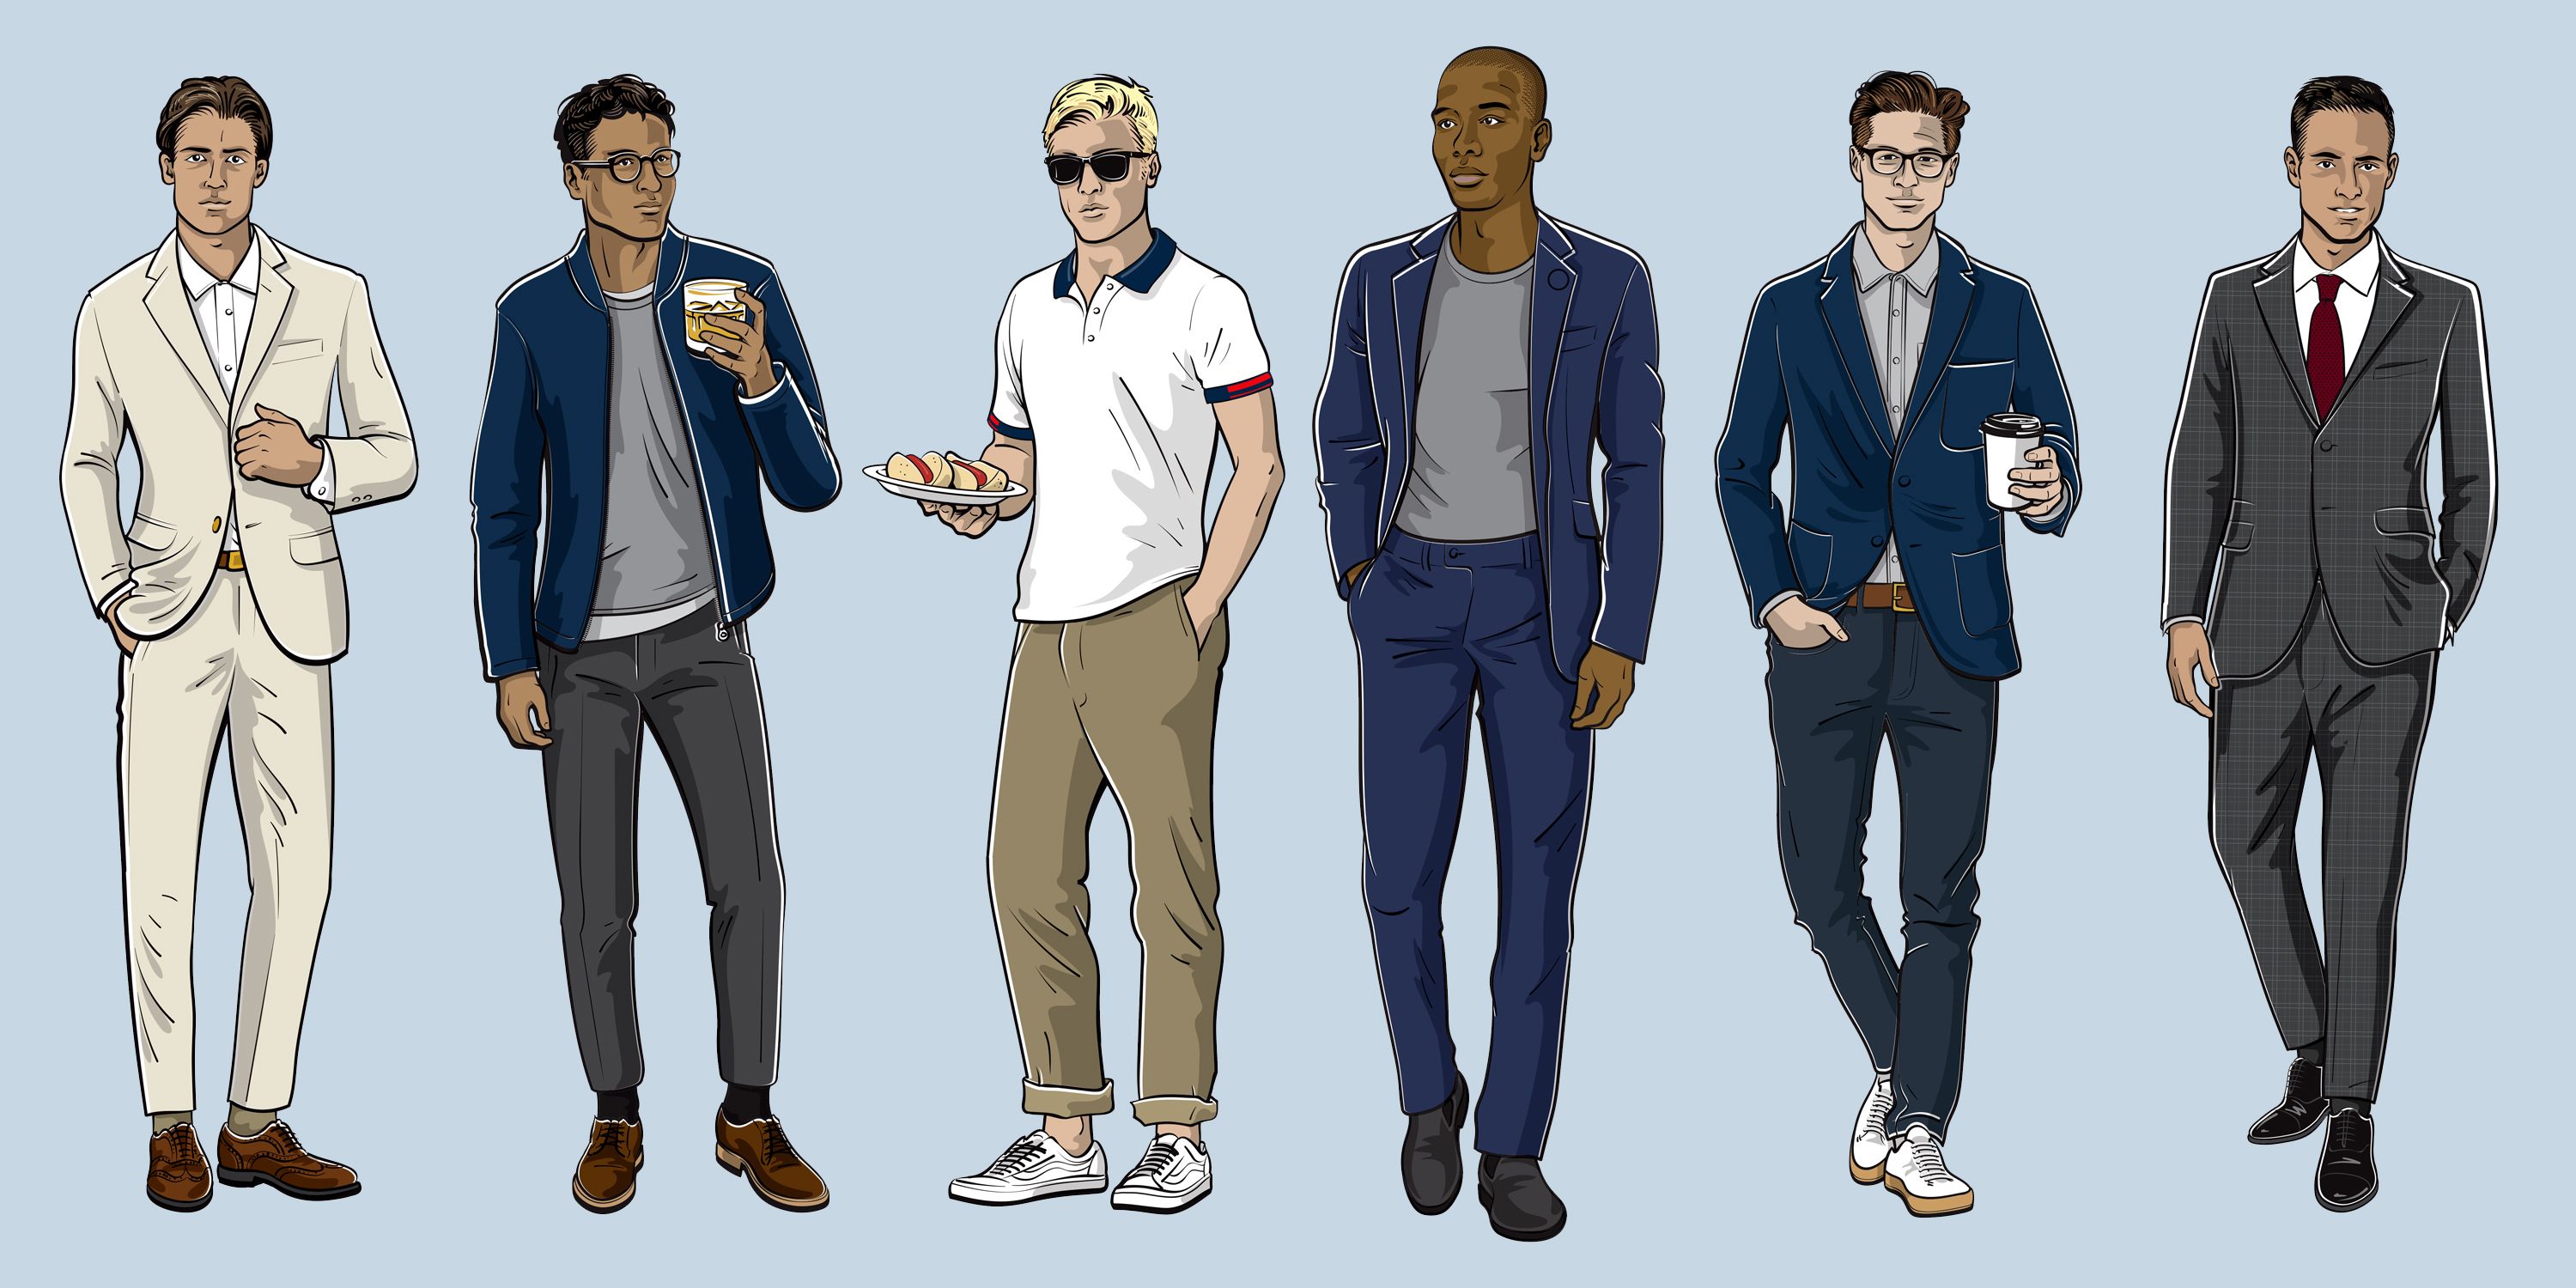 How should man dress up for parties? - Quora